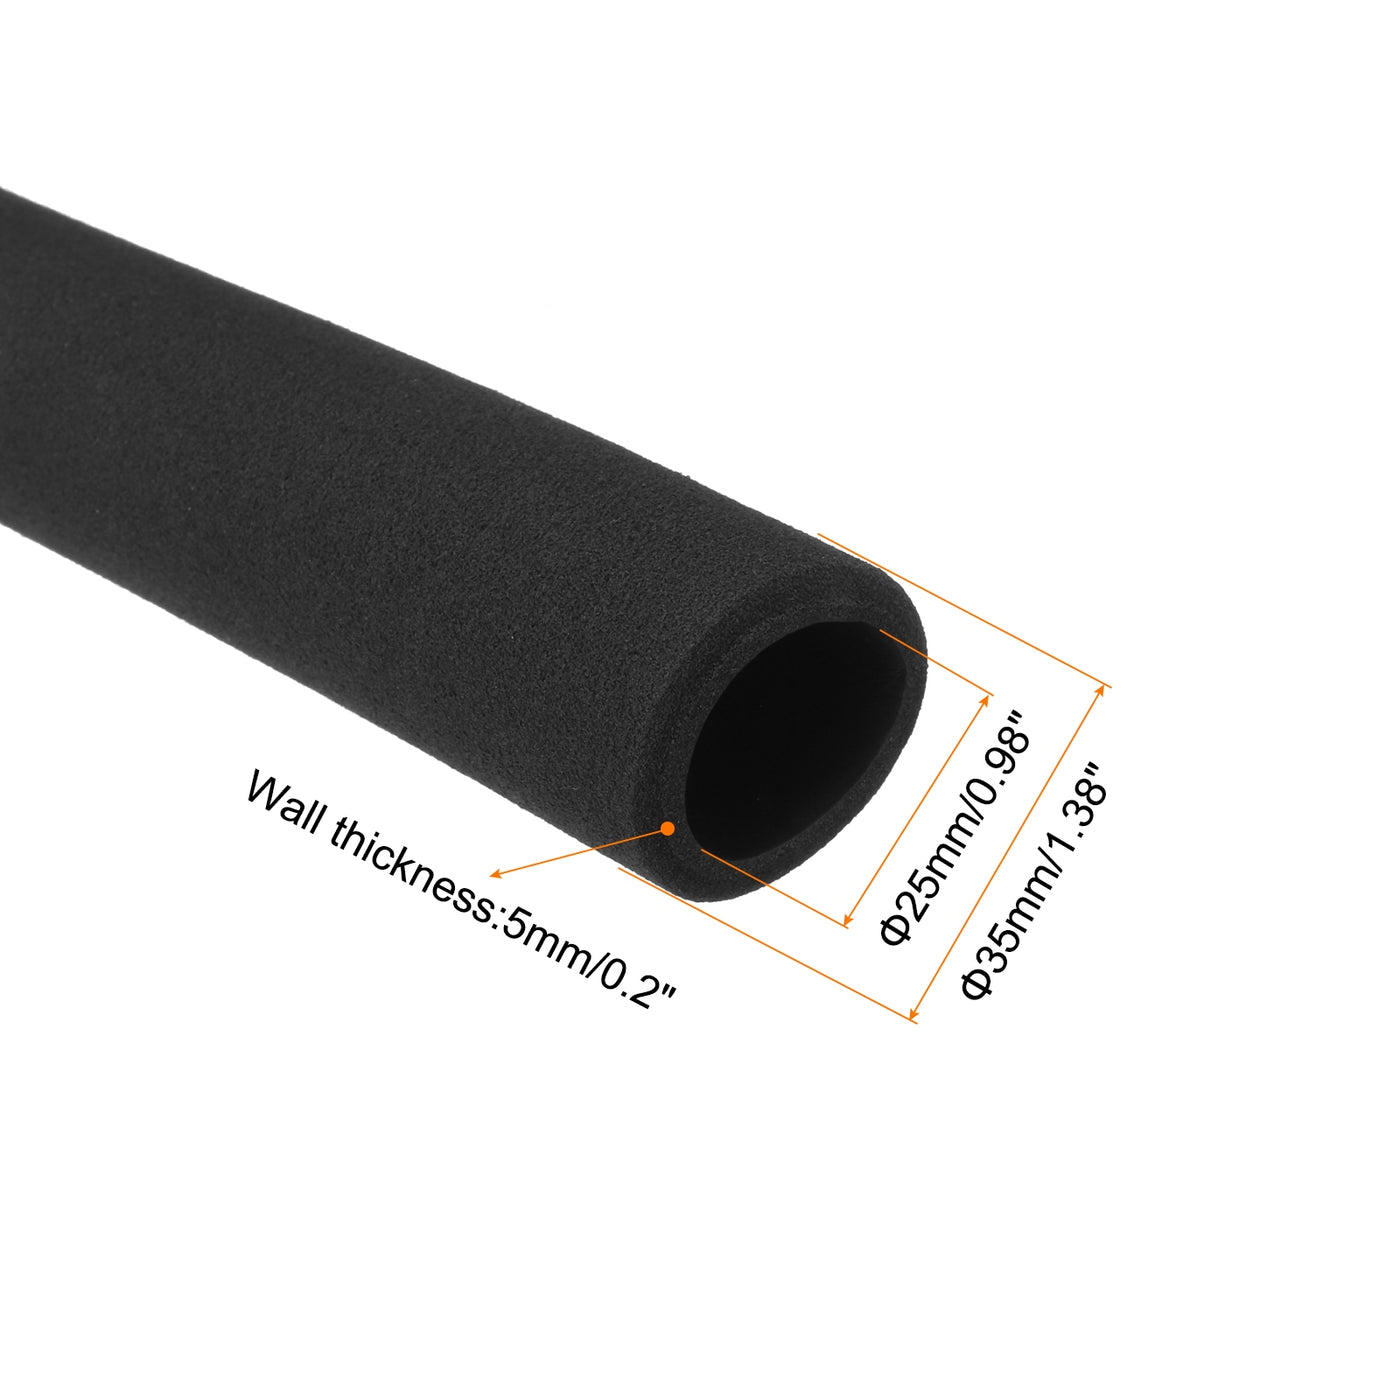 uxcell Uxcell Pipe Insulation Tube Foam Tubing for Handle Grip Support 25mm ID 35mm OD 195mm Heat Preservation Black